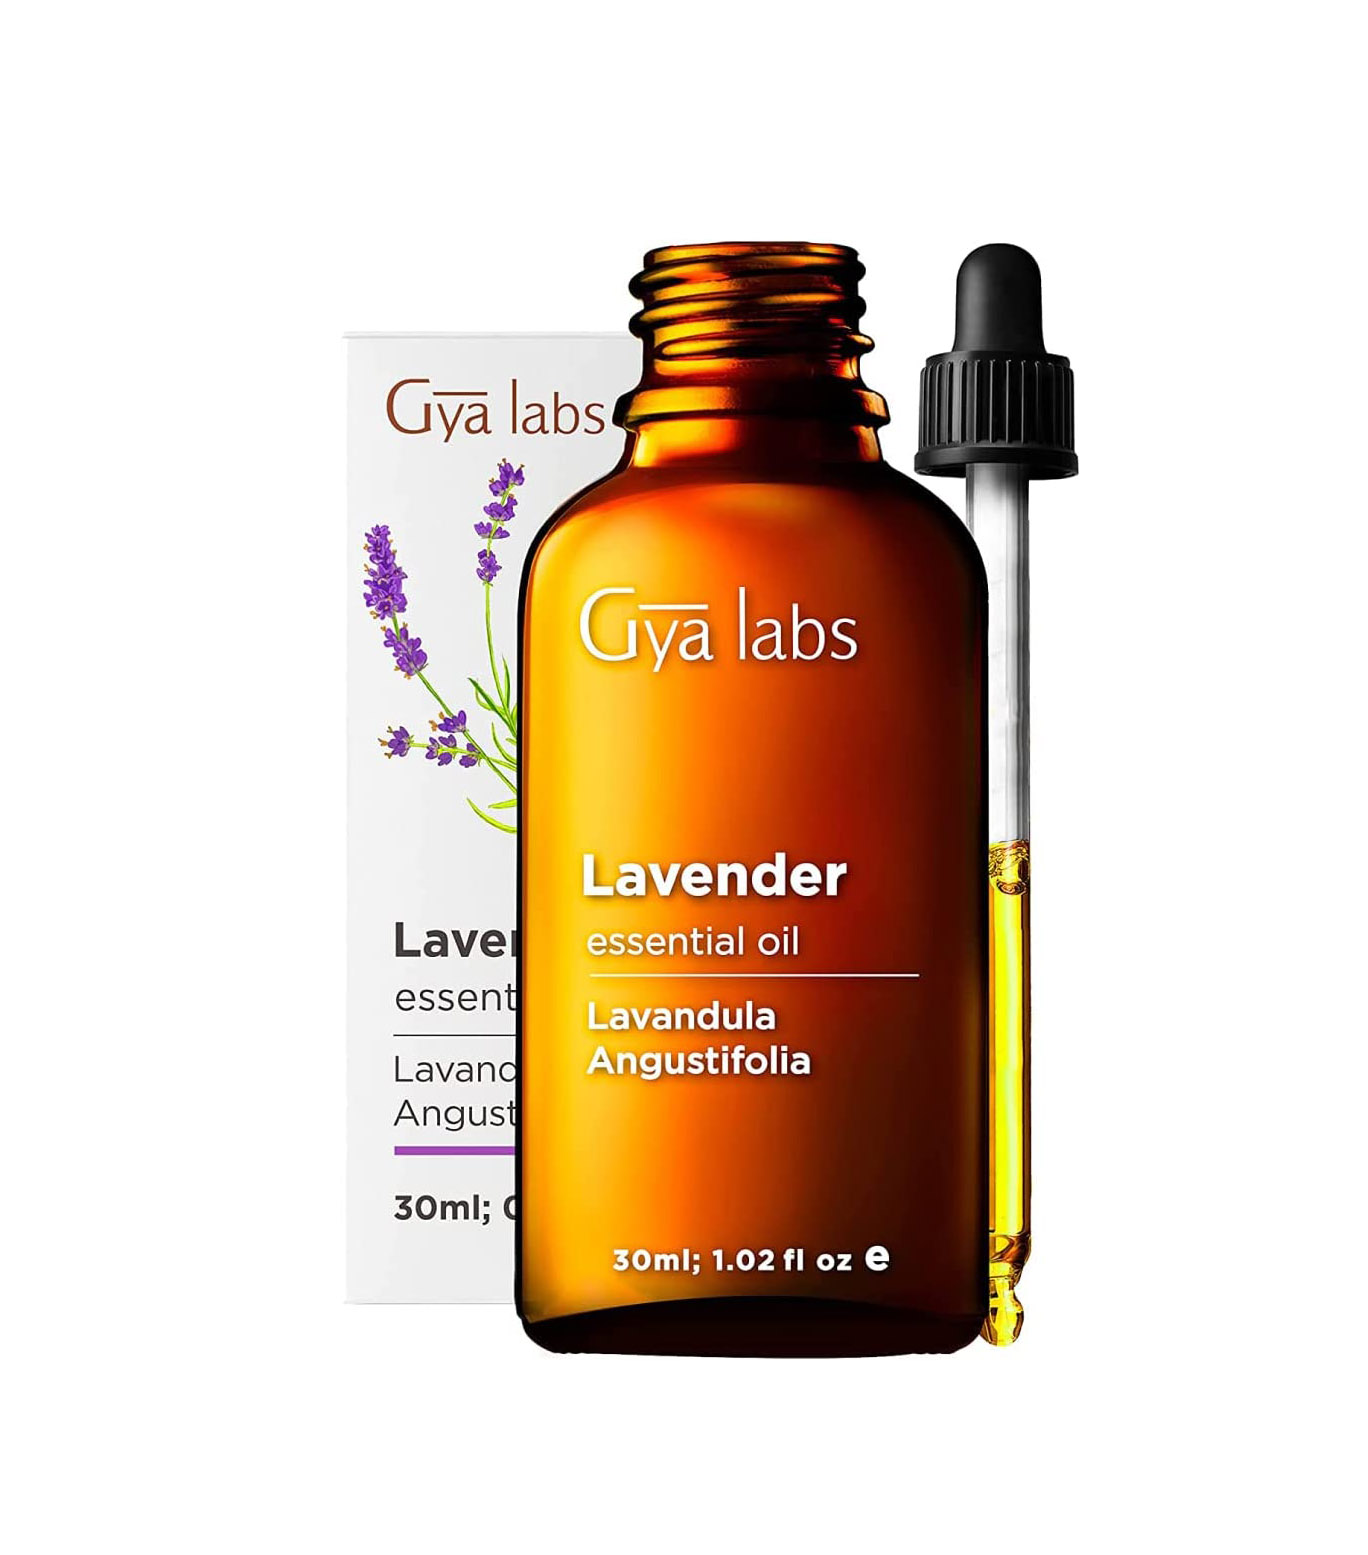 Sunburn Recovery Essential Oil Blend- With Lavender To Soothe Sunburne